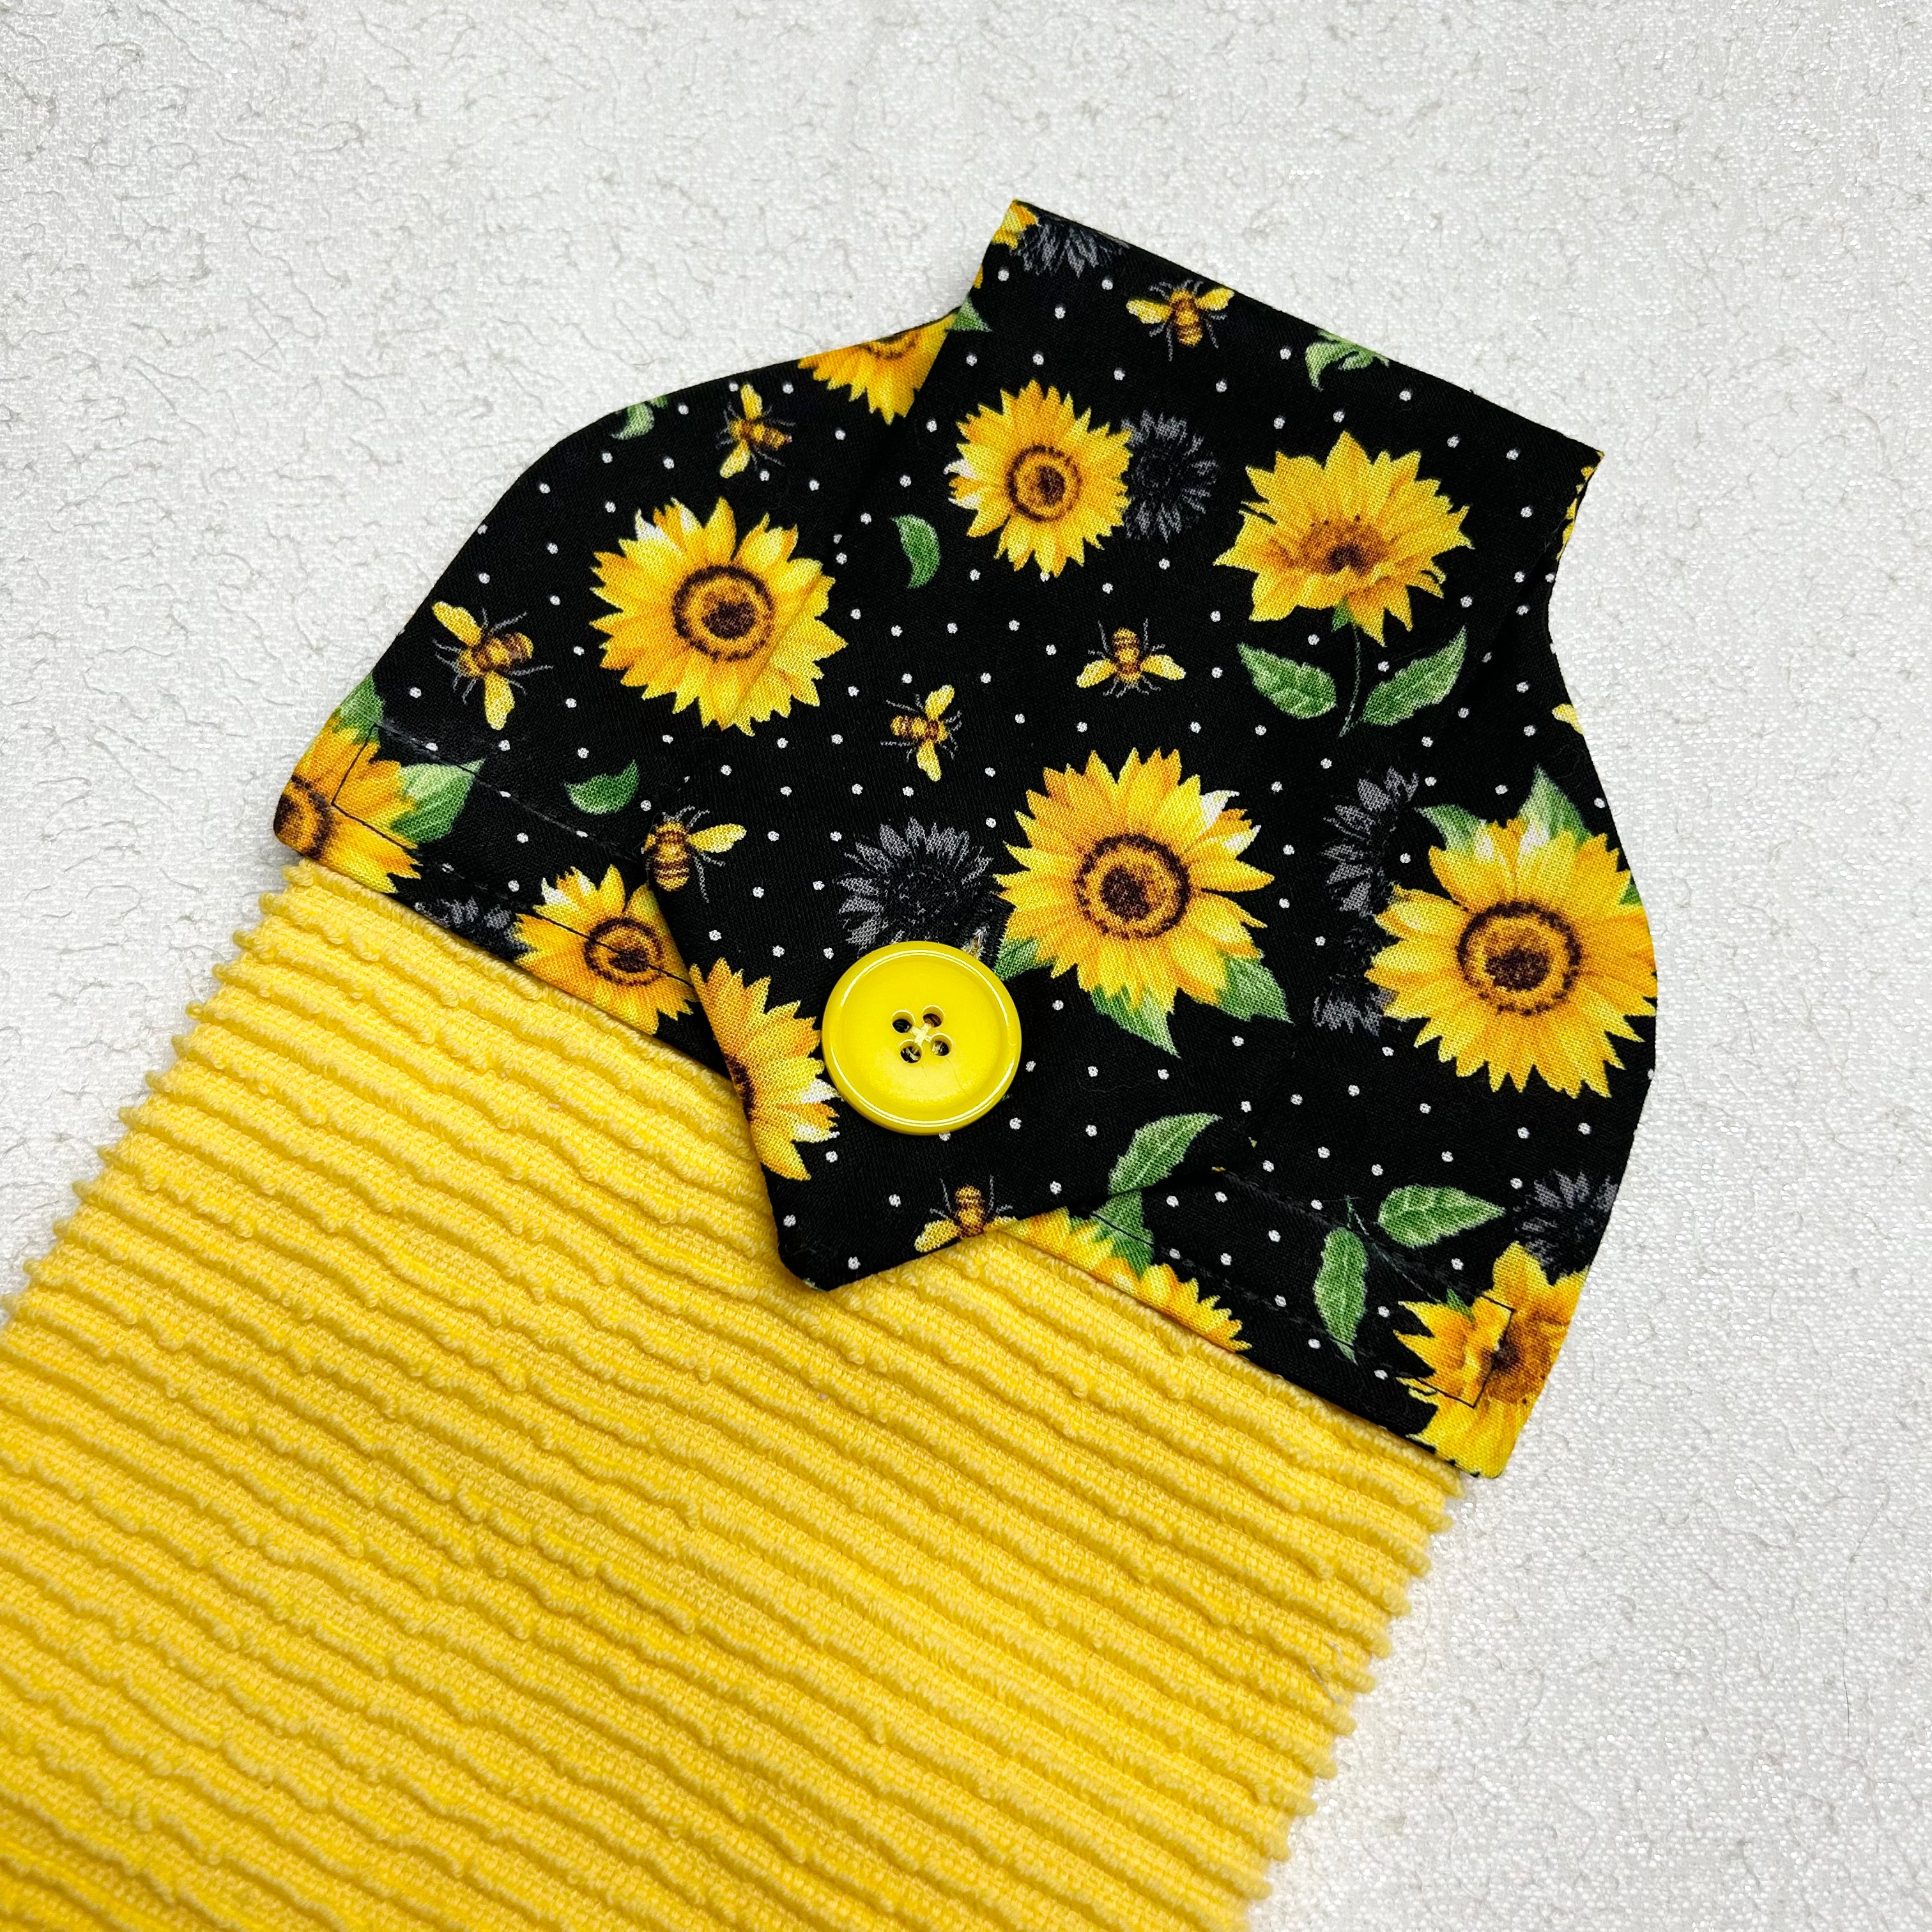 Kitchen Towel: Sunflowers and Bees